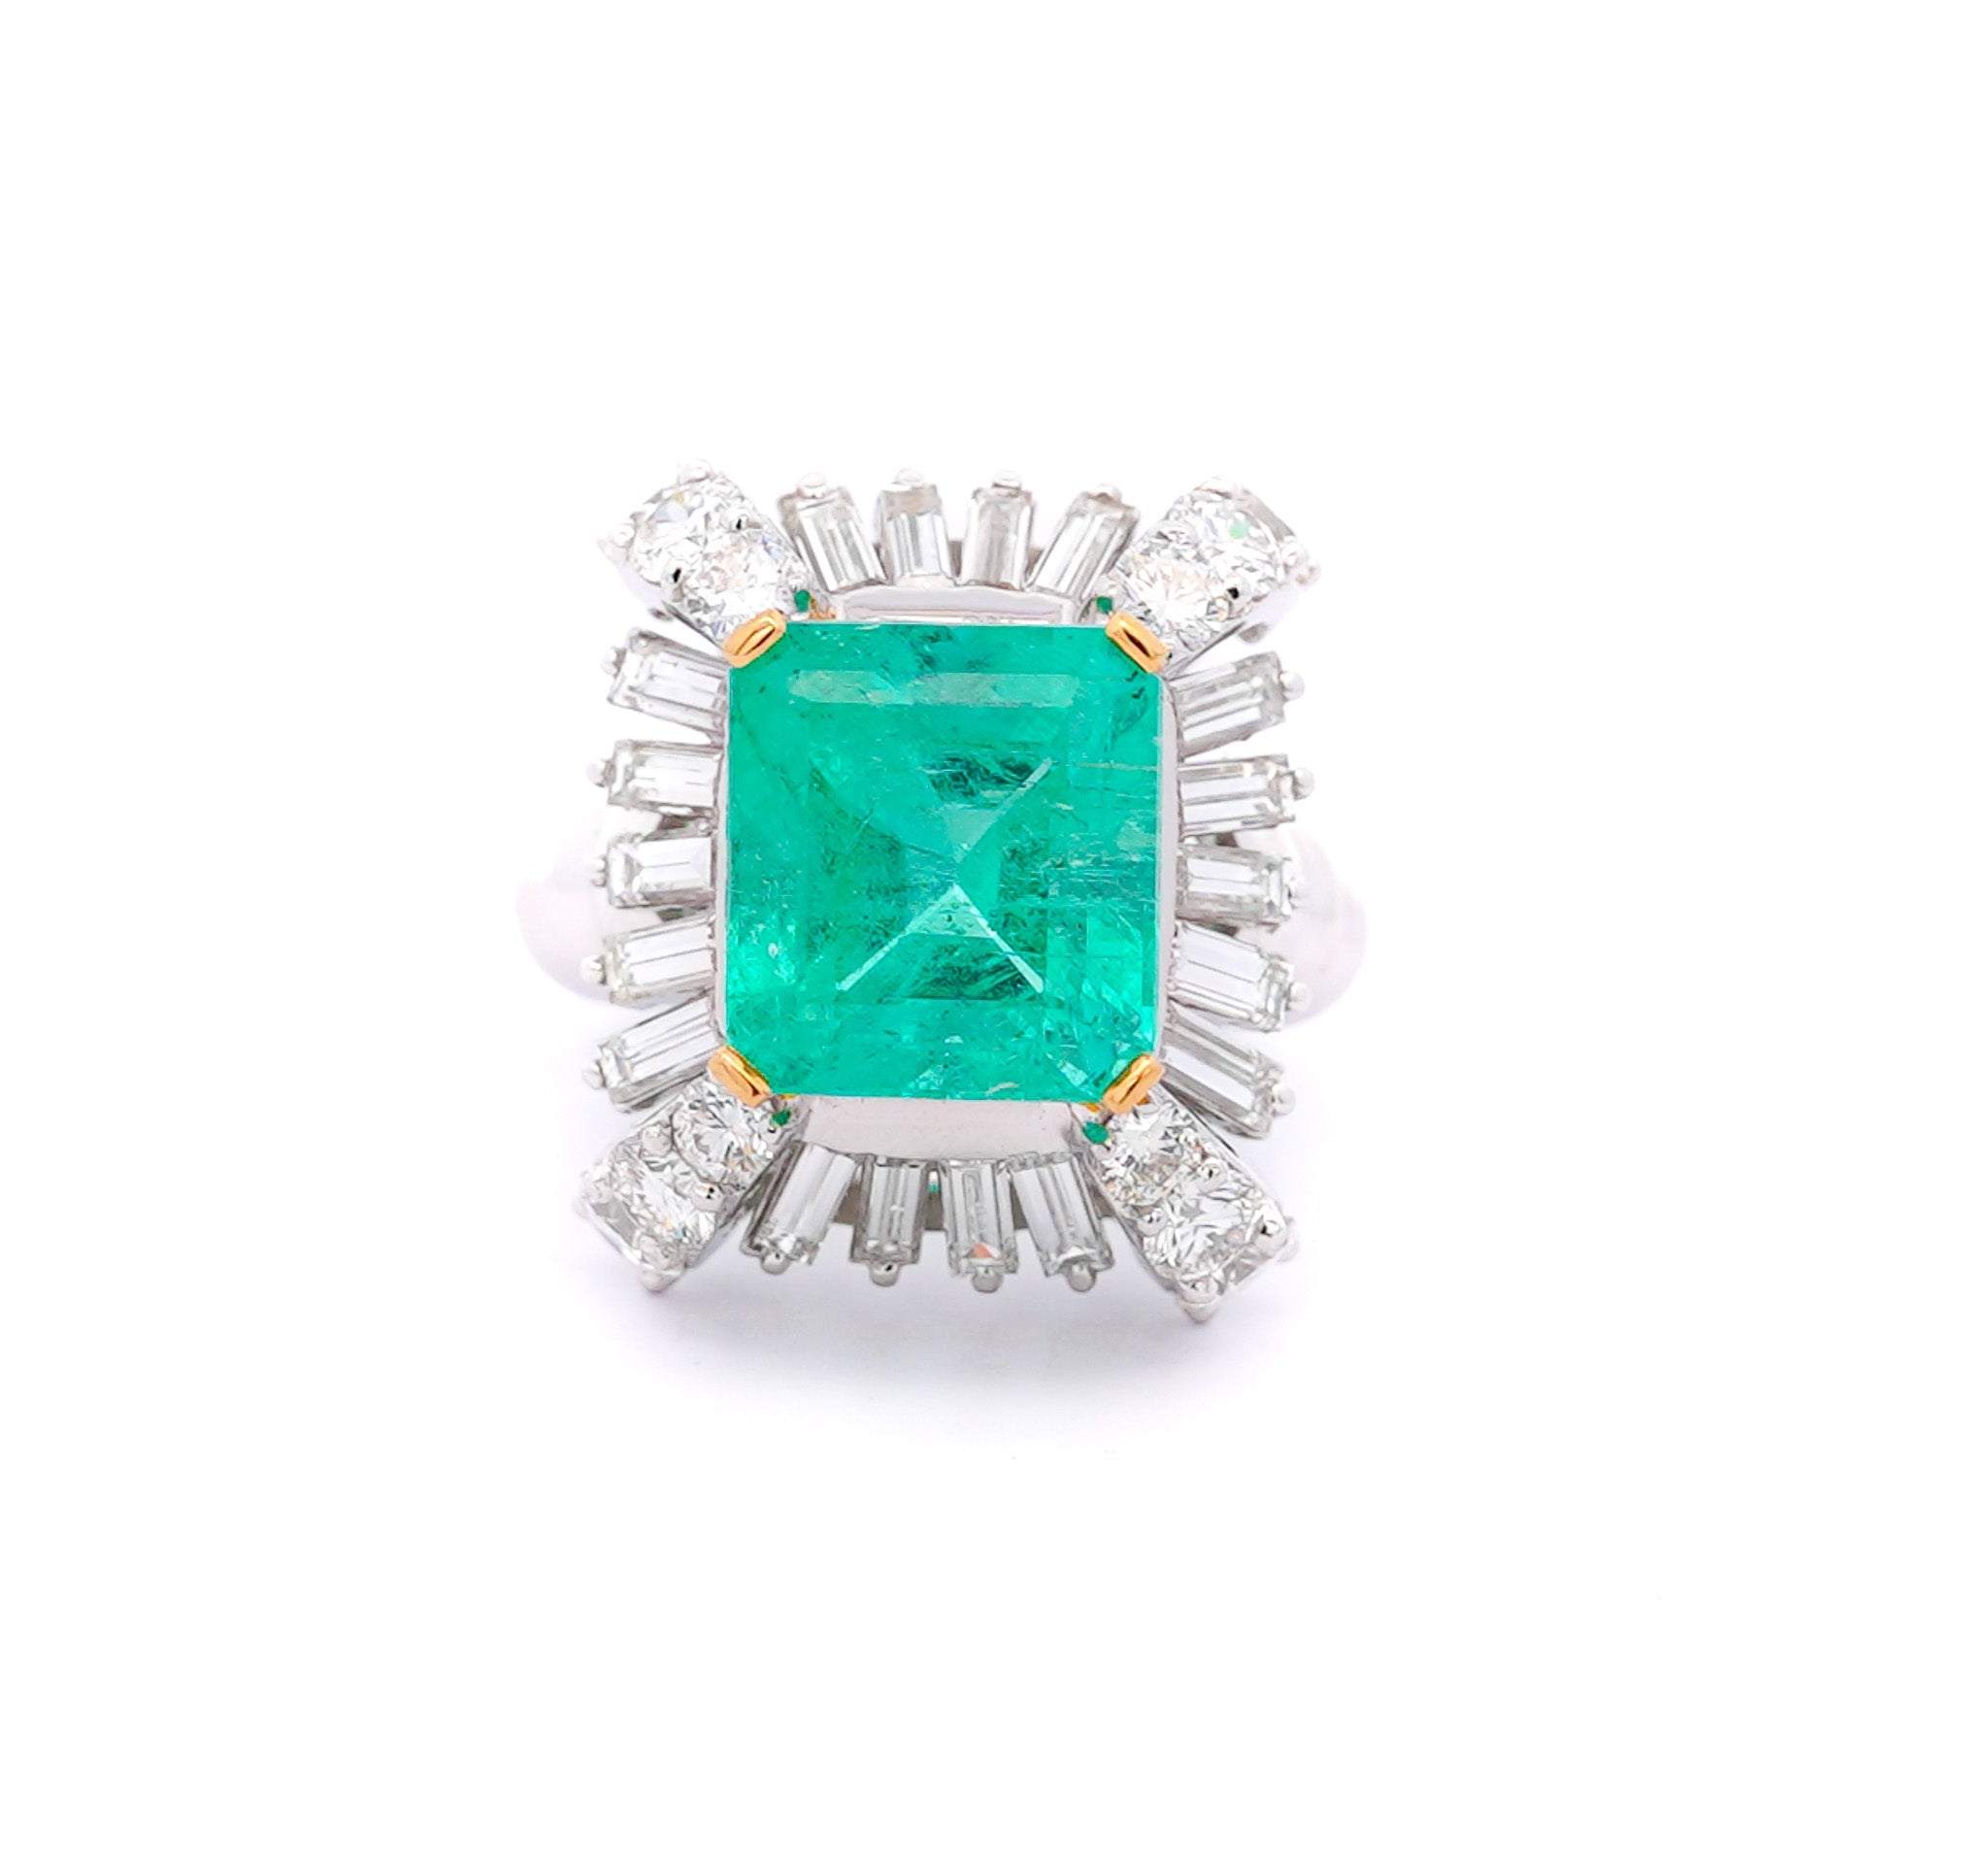 GRS Certified 6.78 carat Colombian Emerald and Baguette Cut Diamond Ring